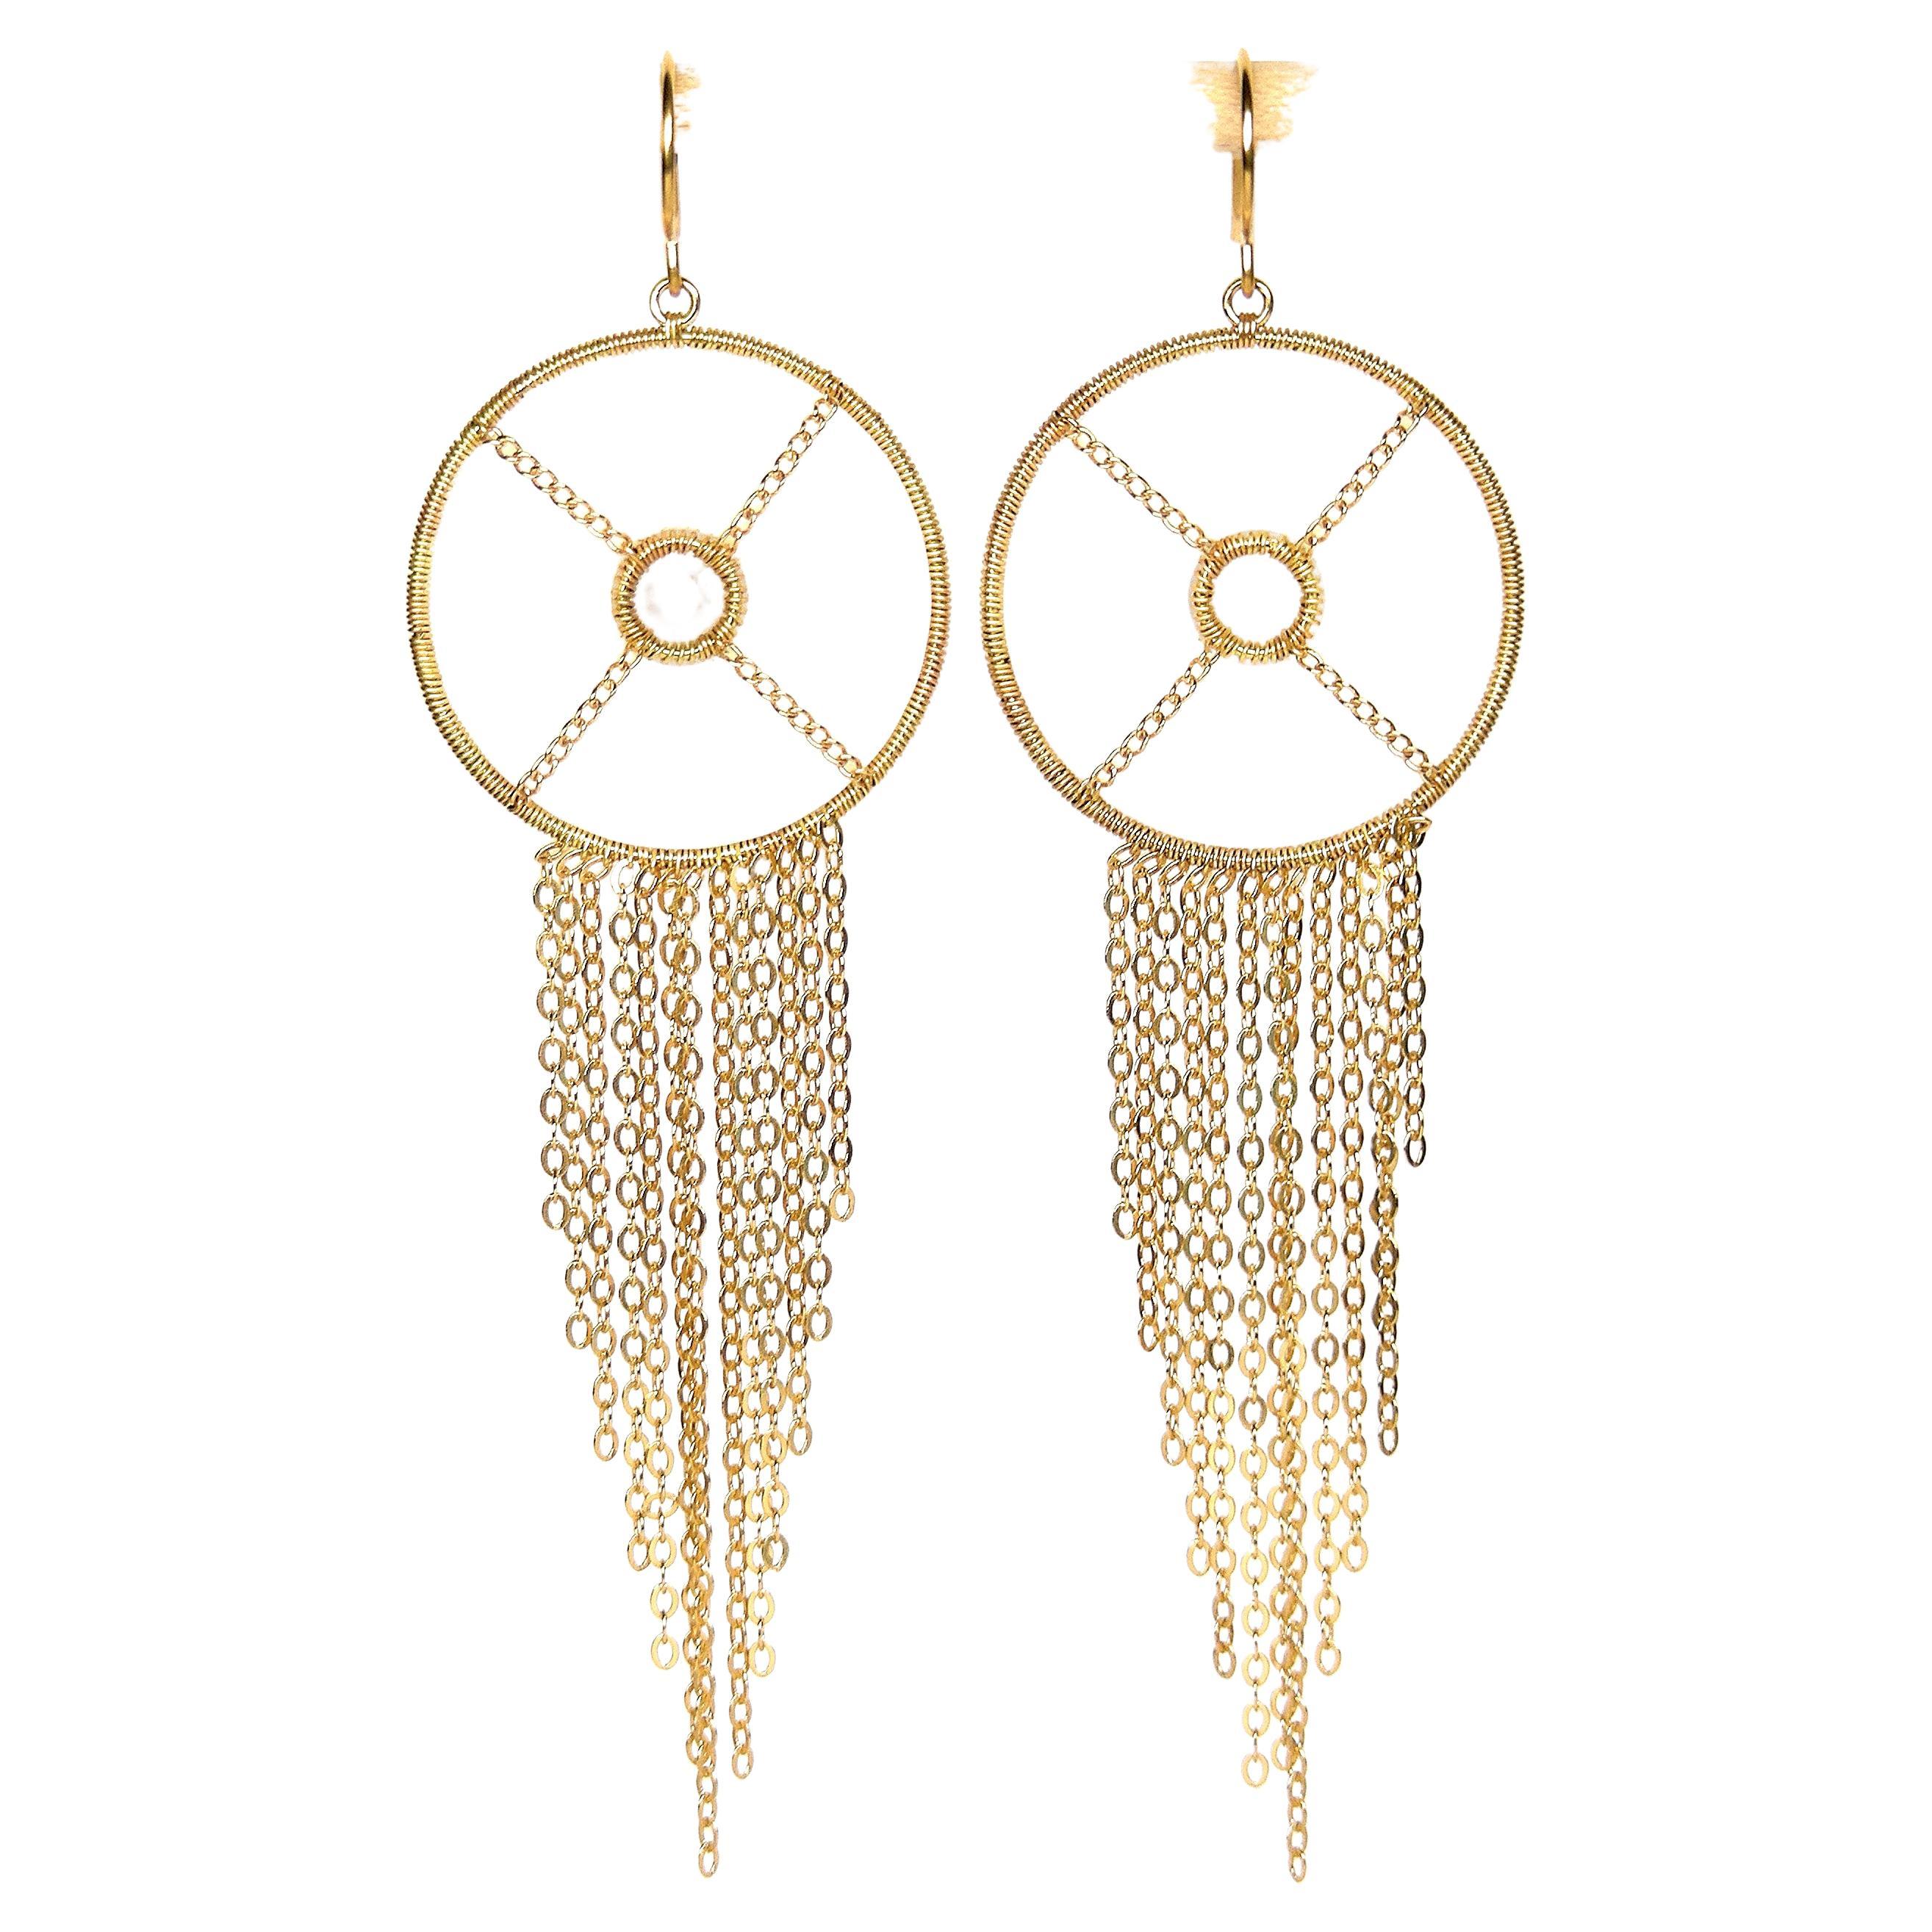 Summer Splash is a collection of easy to wear, fashion oriented hoop earrings to wear with lightness, chic and glam only this pieces for this collection 
Hoop 18k Gold Earrings with Pink Quartz Mandala Central Round Motif
They come in 6 variations